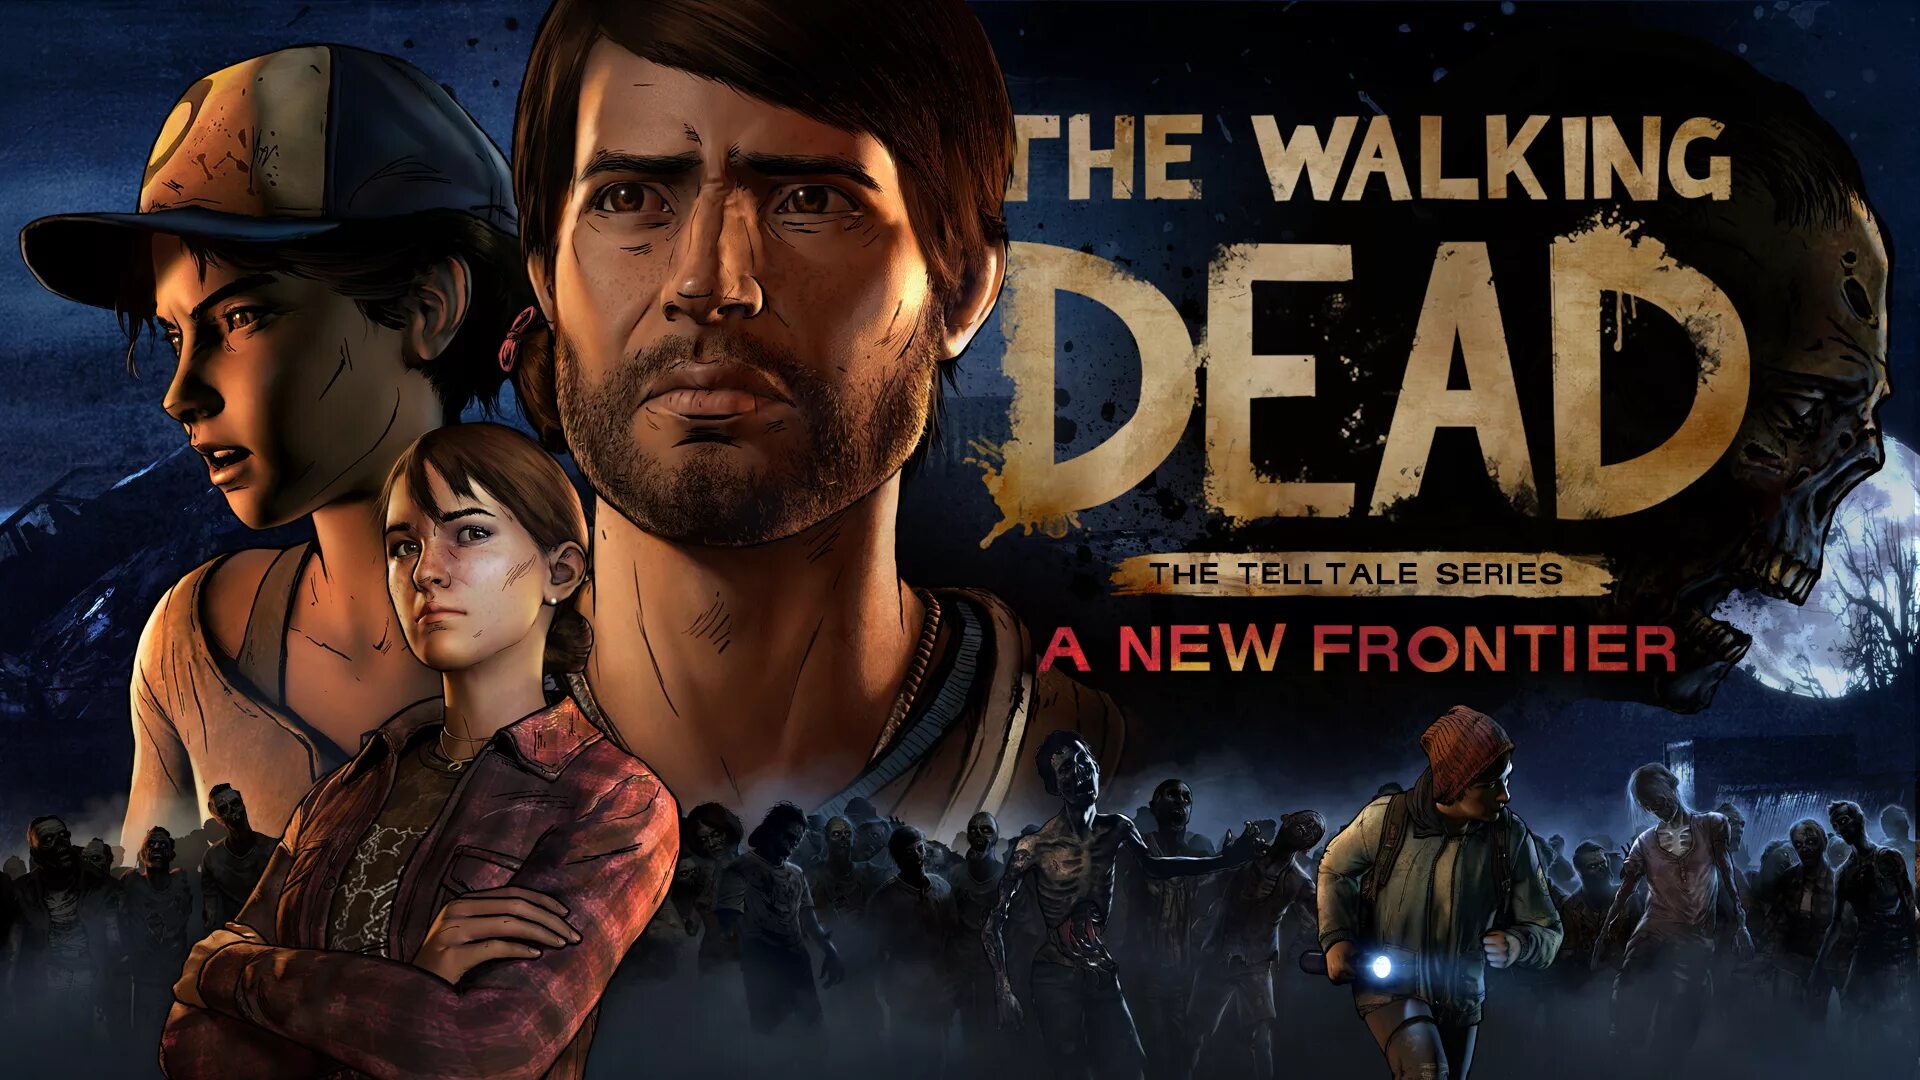 The Walking Dead a New Frontier Ричмонд. The Walking Dead: the Telltale Series - a New Frontier.